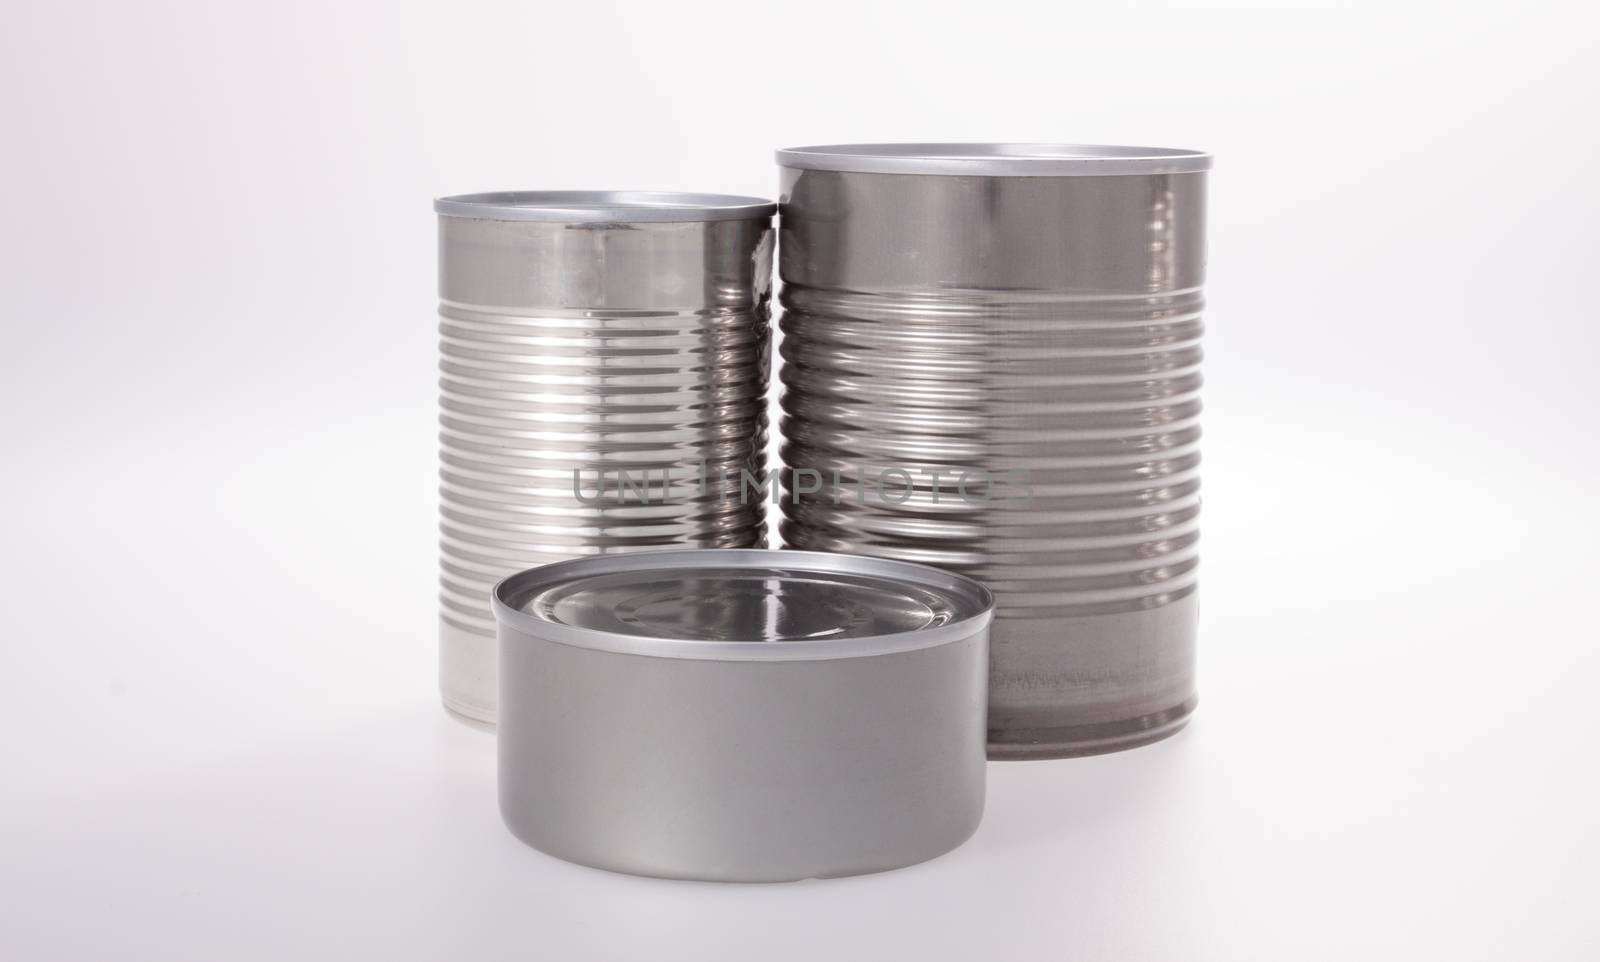 Aluminum shiny food can without label isolated on white